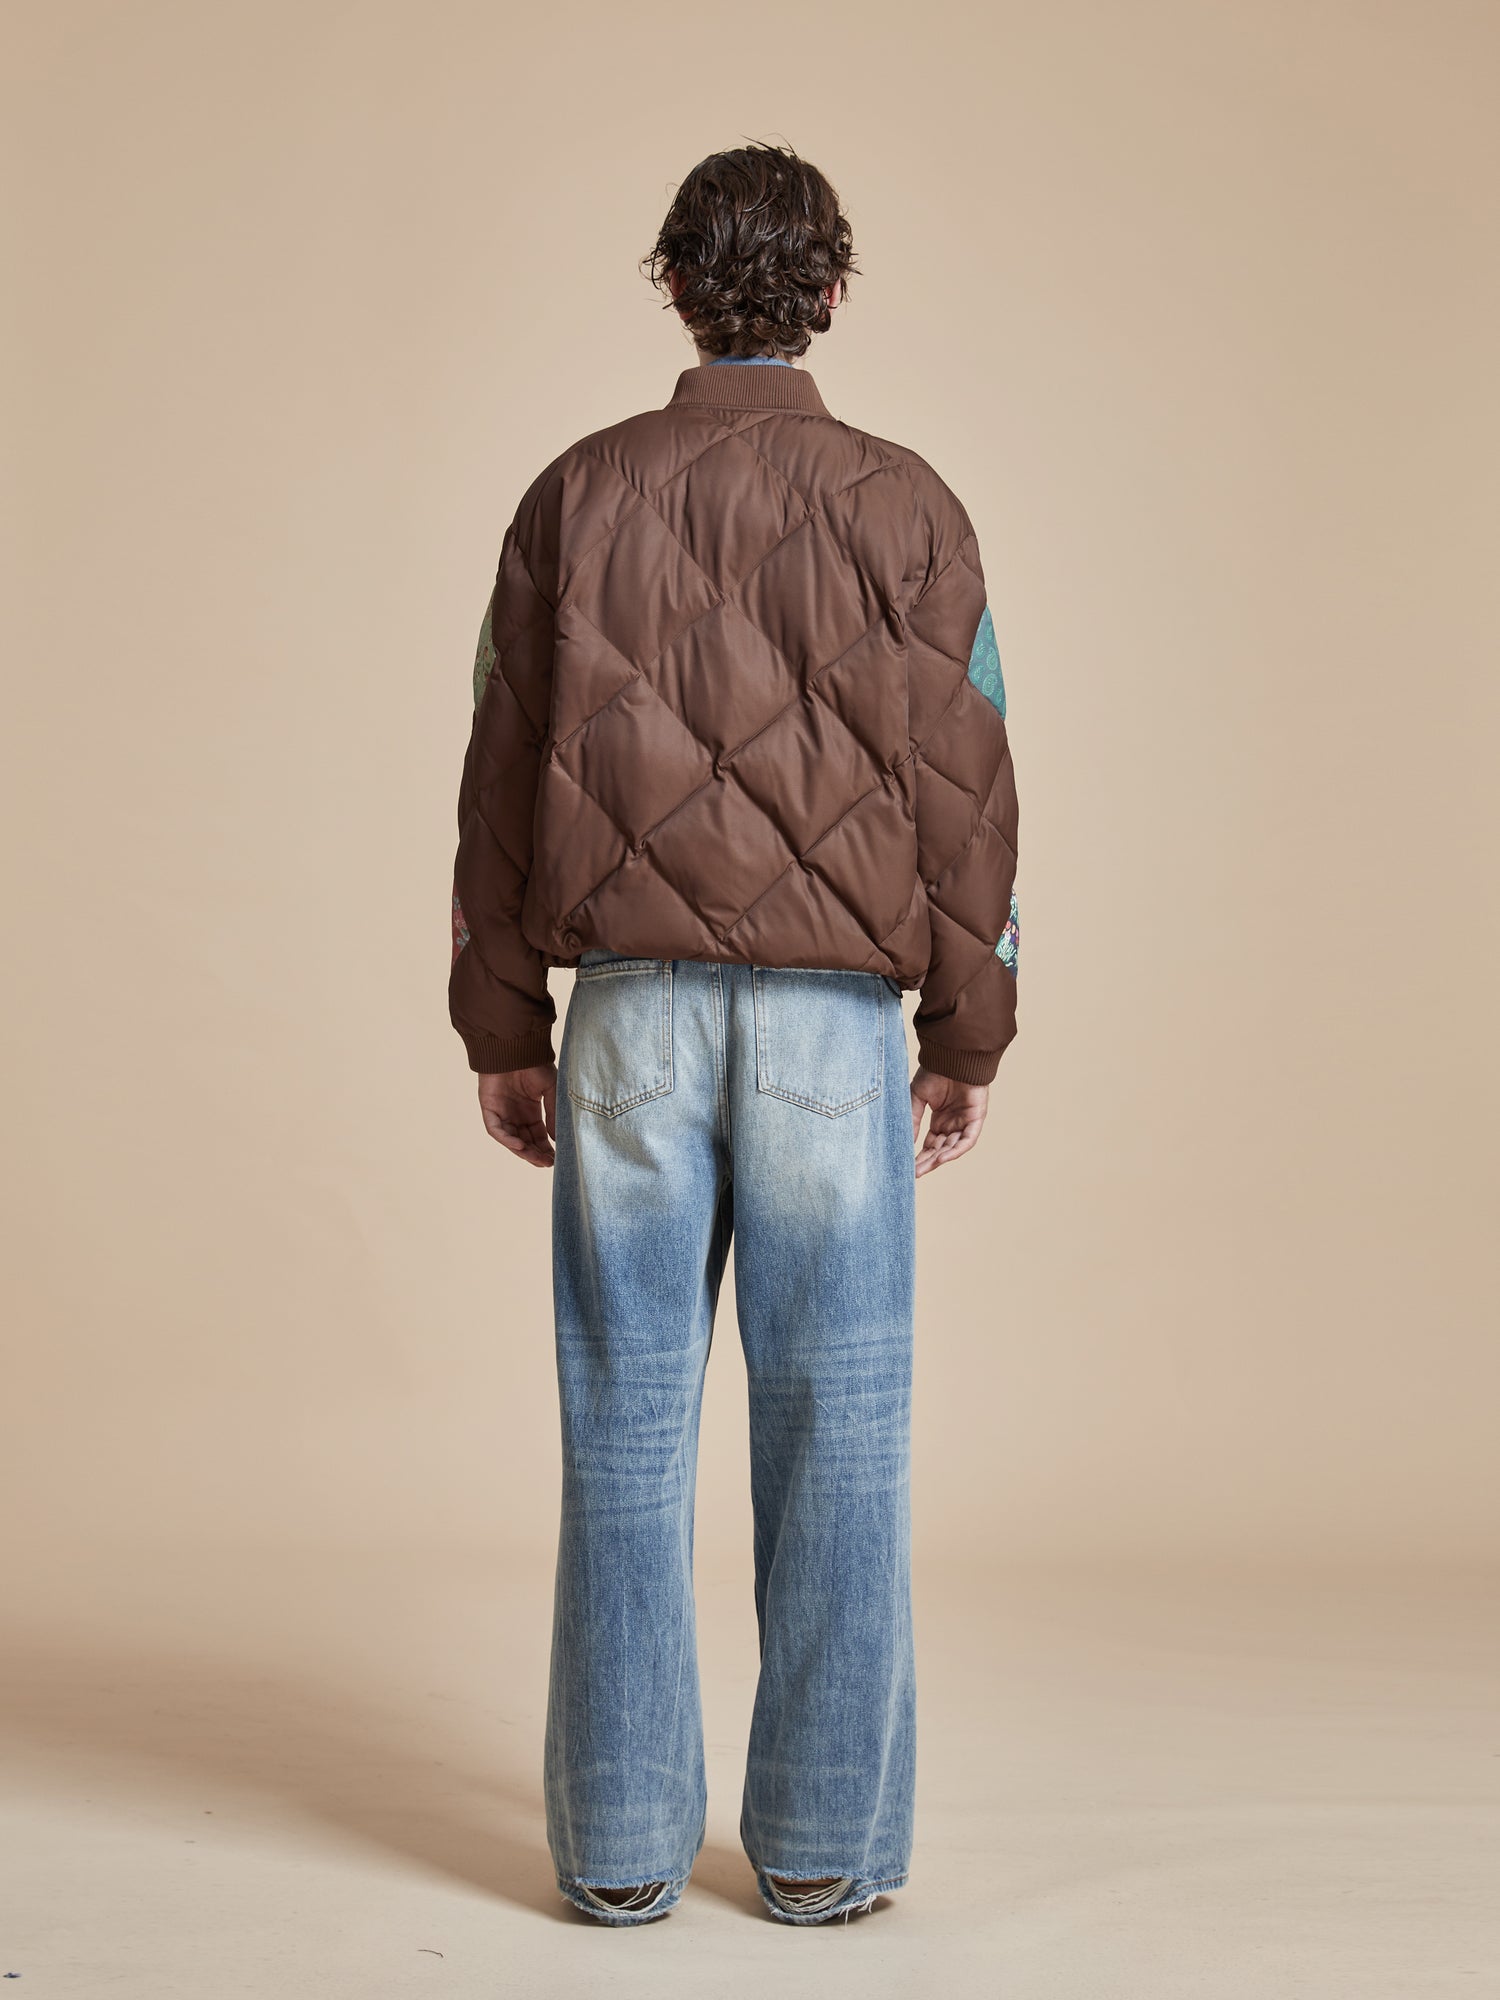 A man wearing jeans and a Found Diamond Quilt Patchwork Jacket.